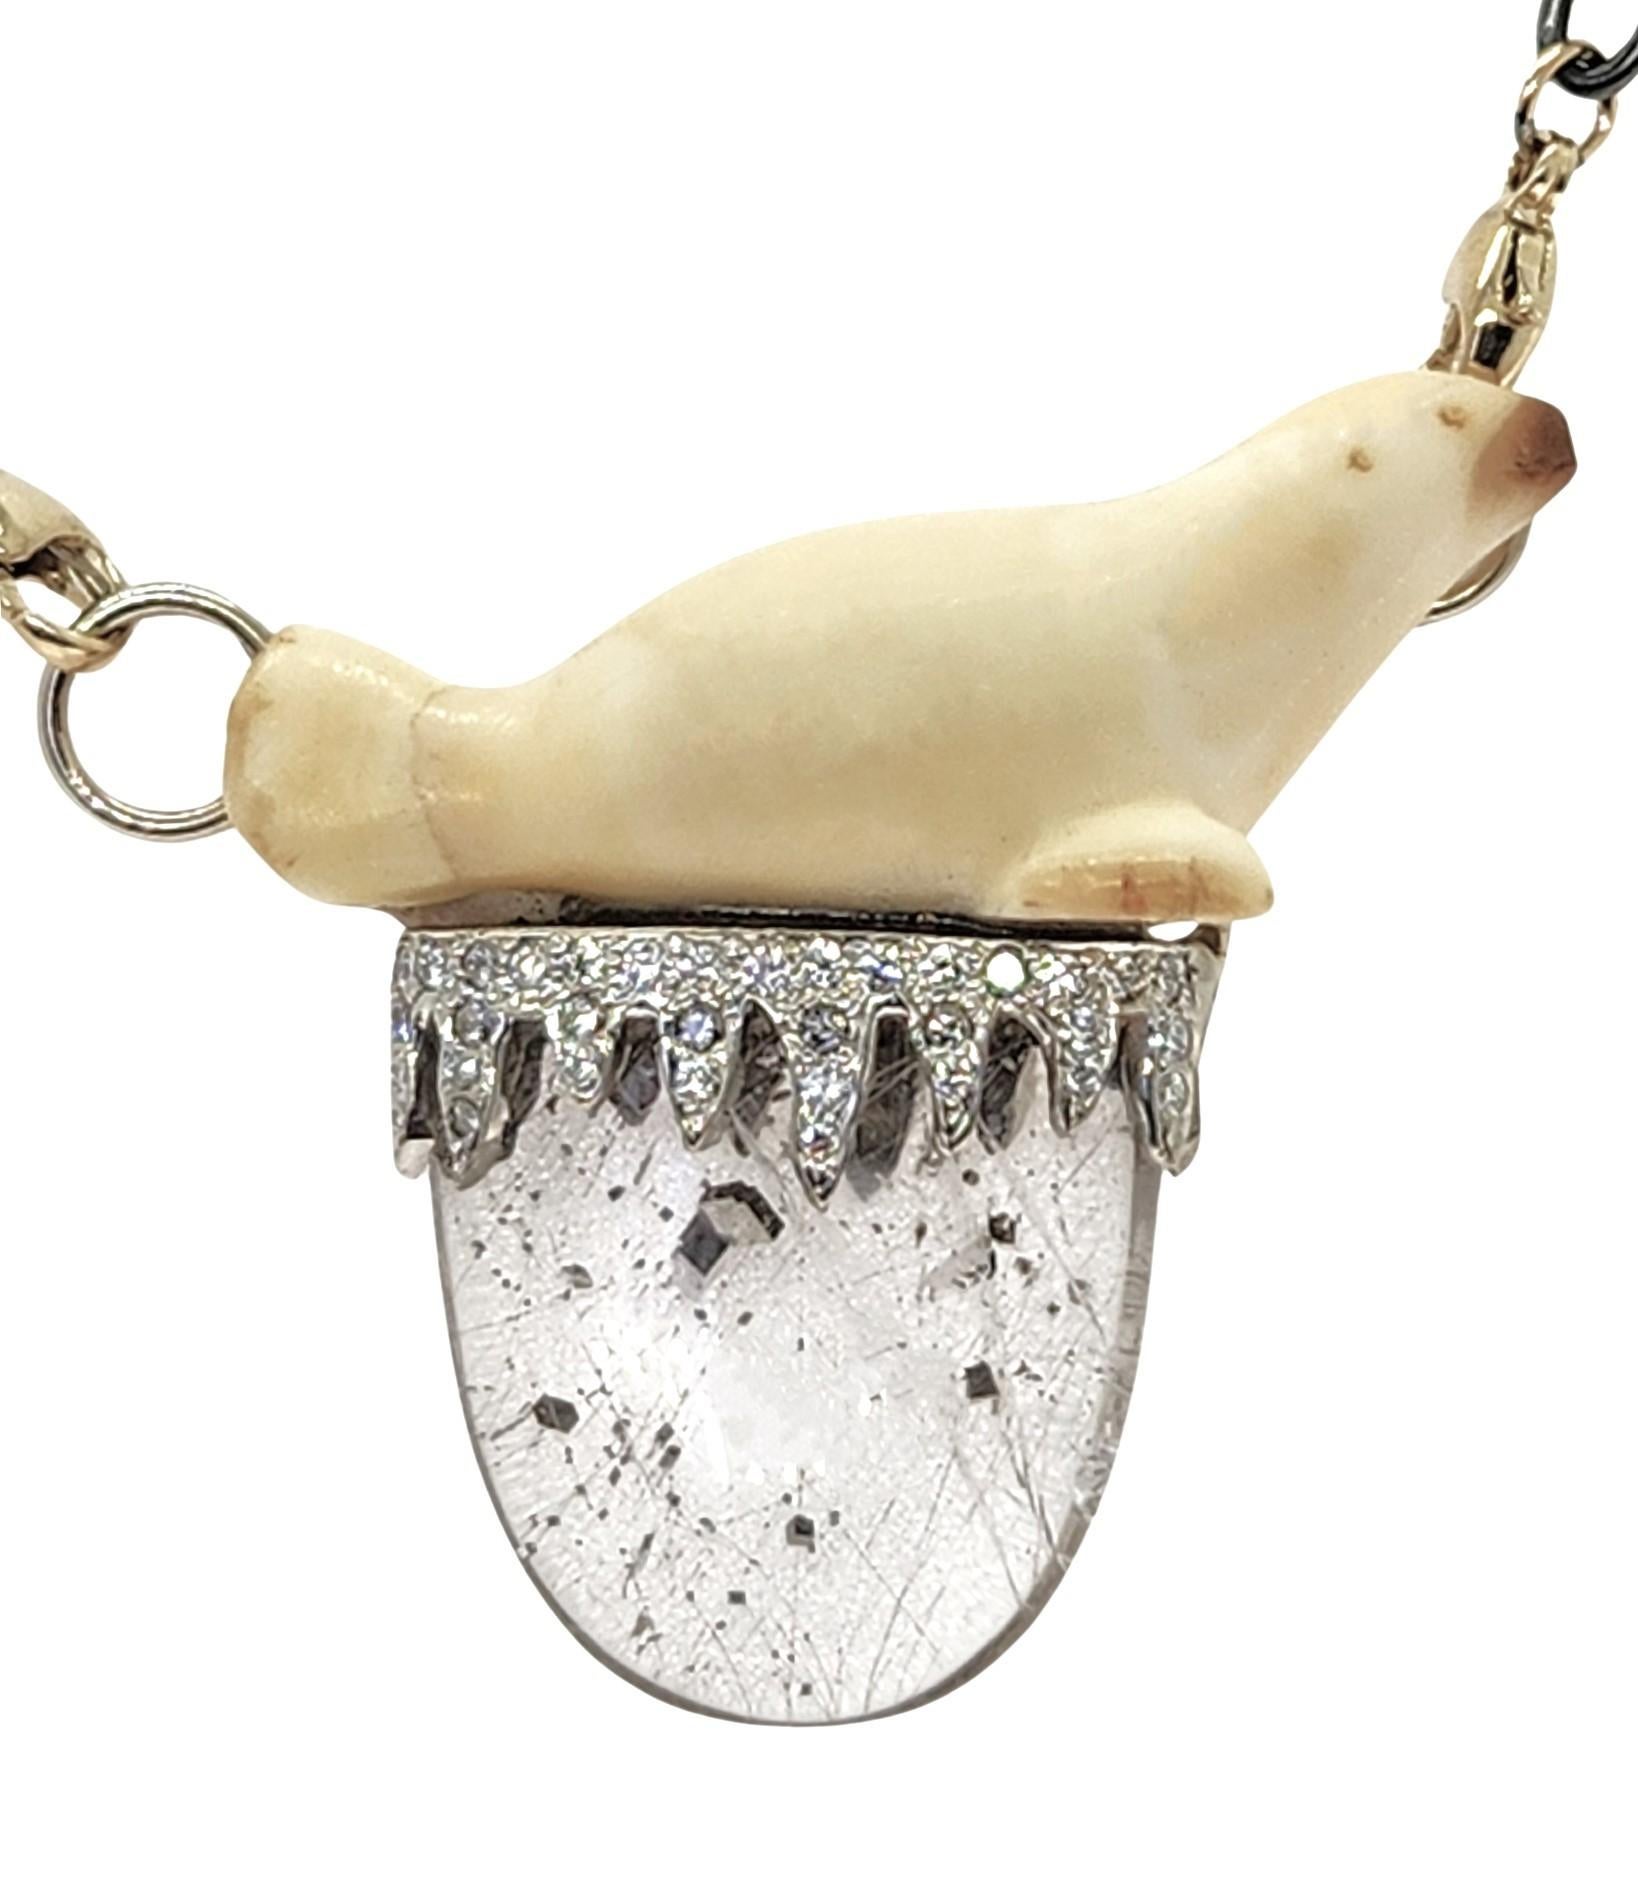 What began as an inherited scene of likely Inuit carved animals and a hunter in bone, developed into a mini collection of jewels never to be reproduced. The Polar Bear was the first to be designed with a beautiful quartz crystal with Limonite and